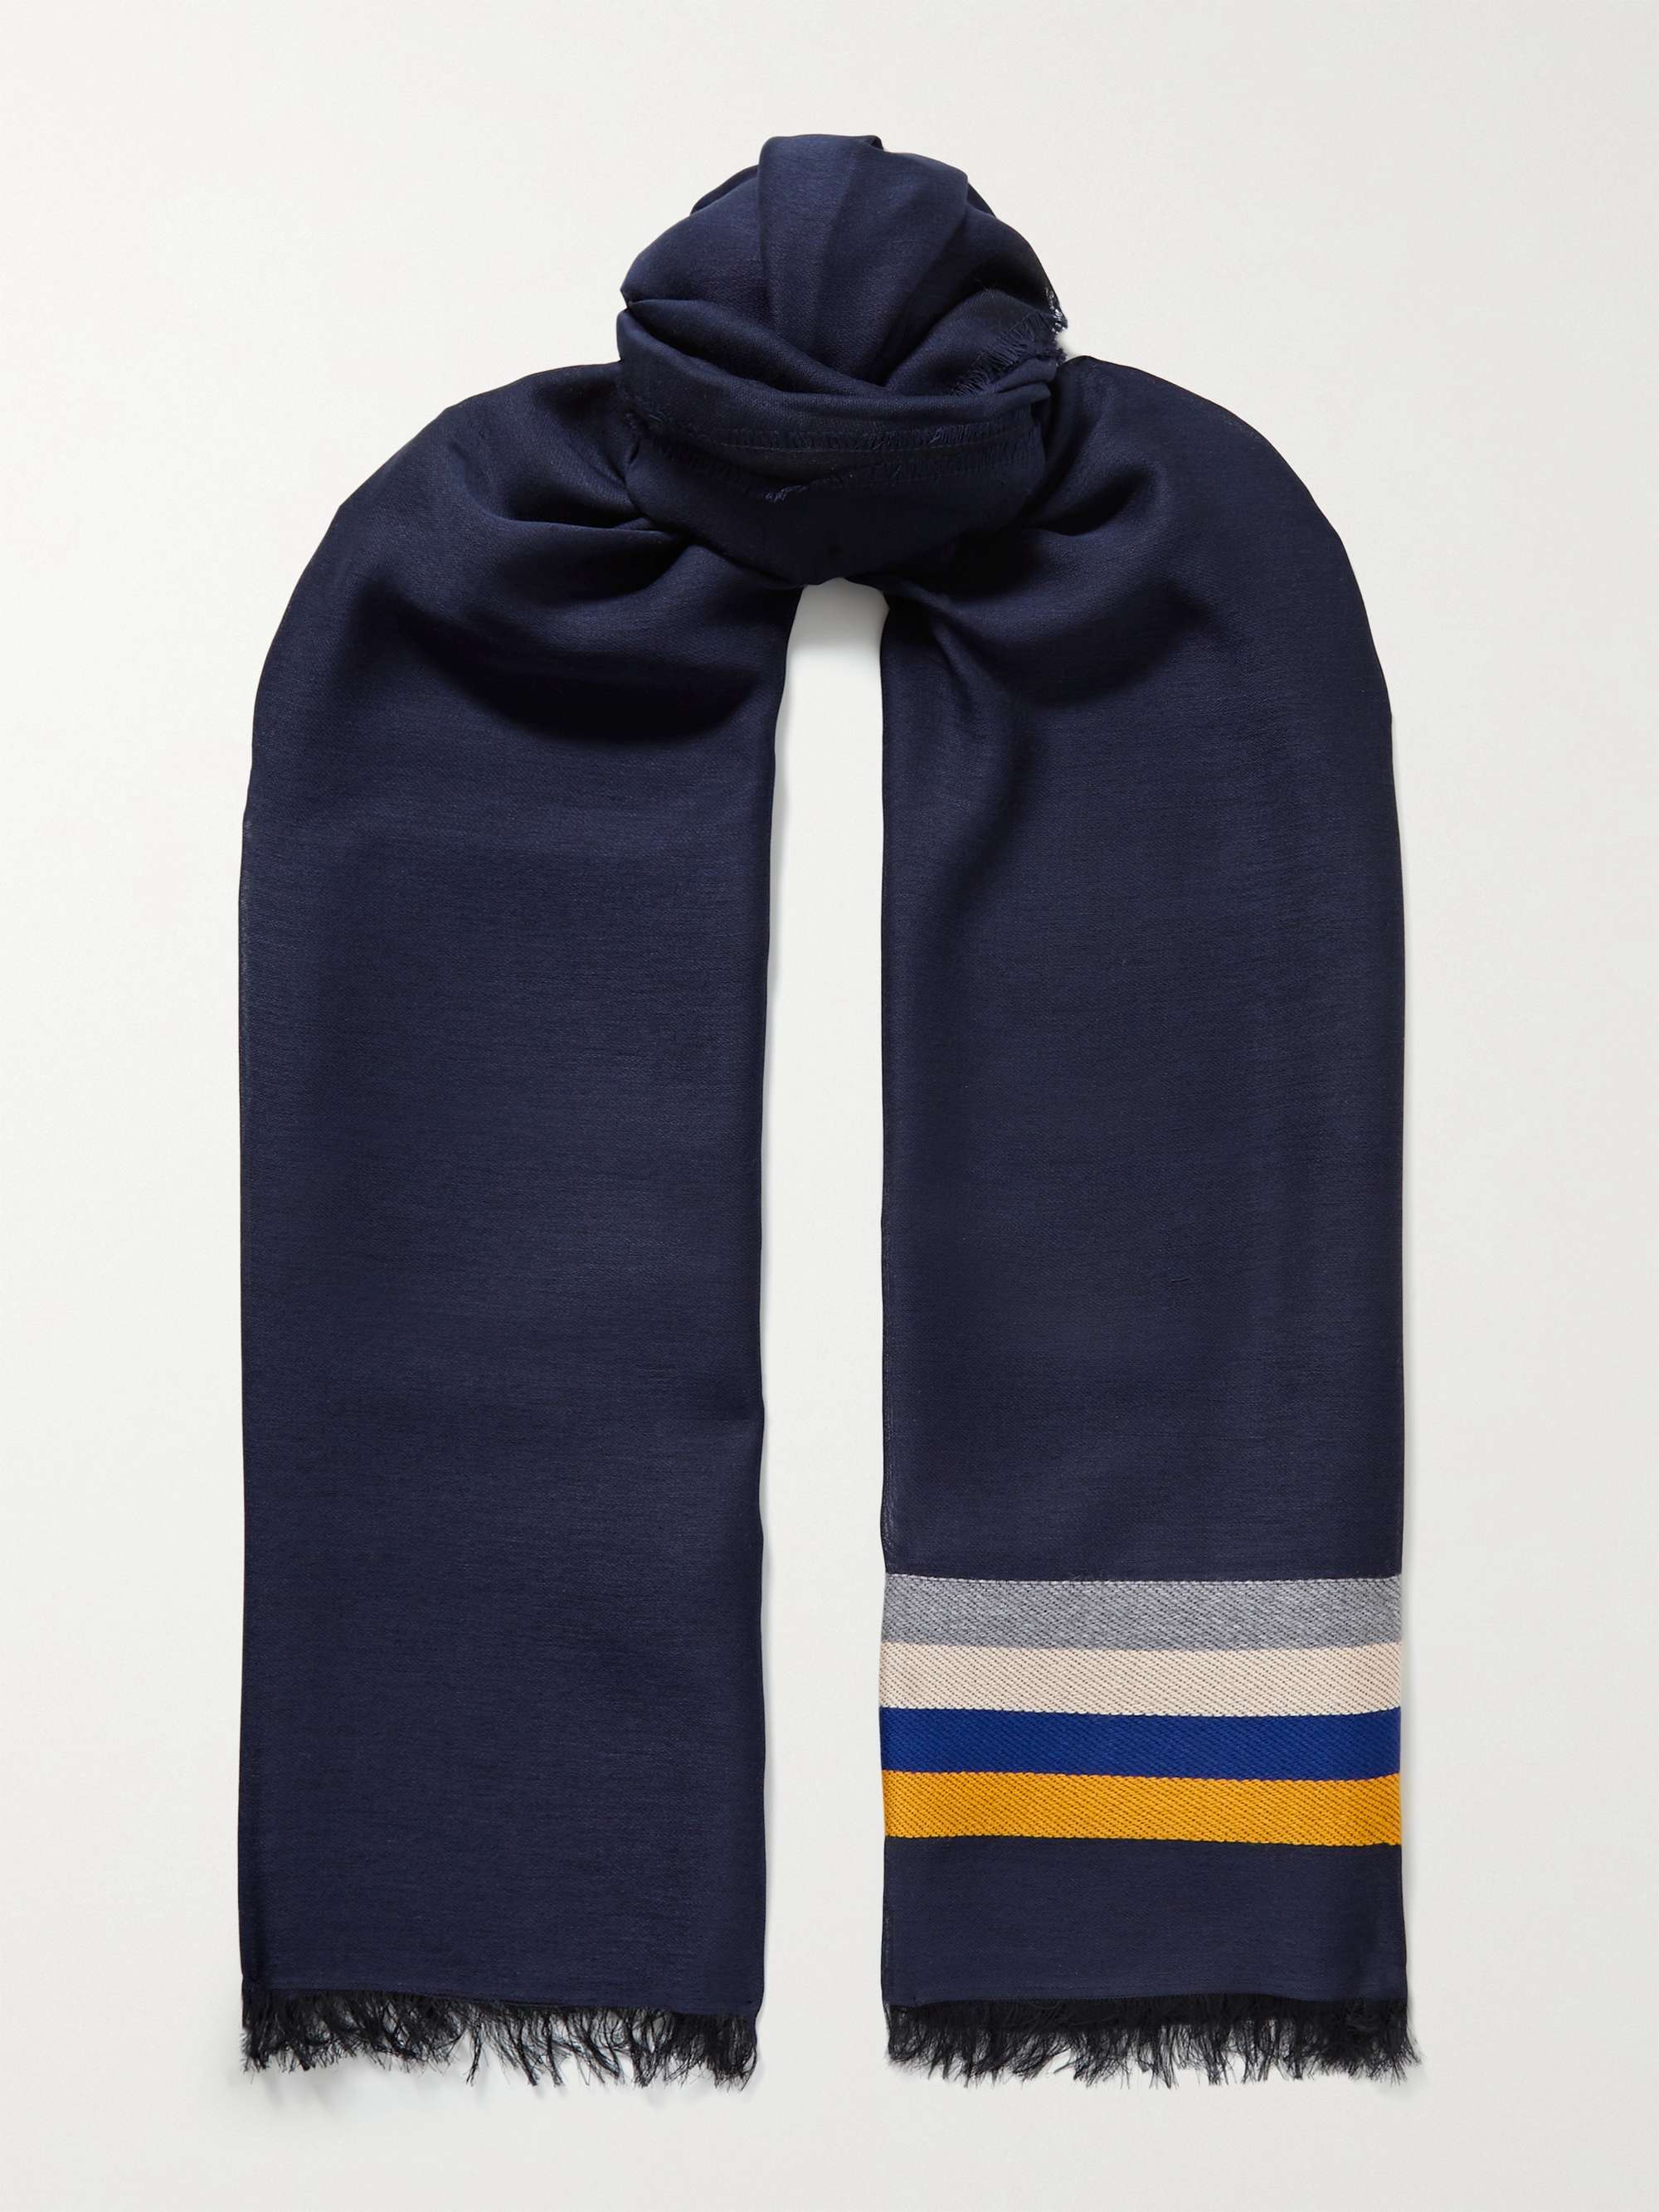 PAUL SMITH Striped Voile Scarf